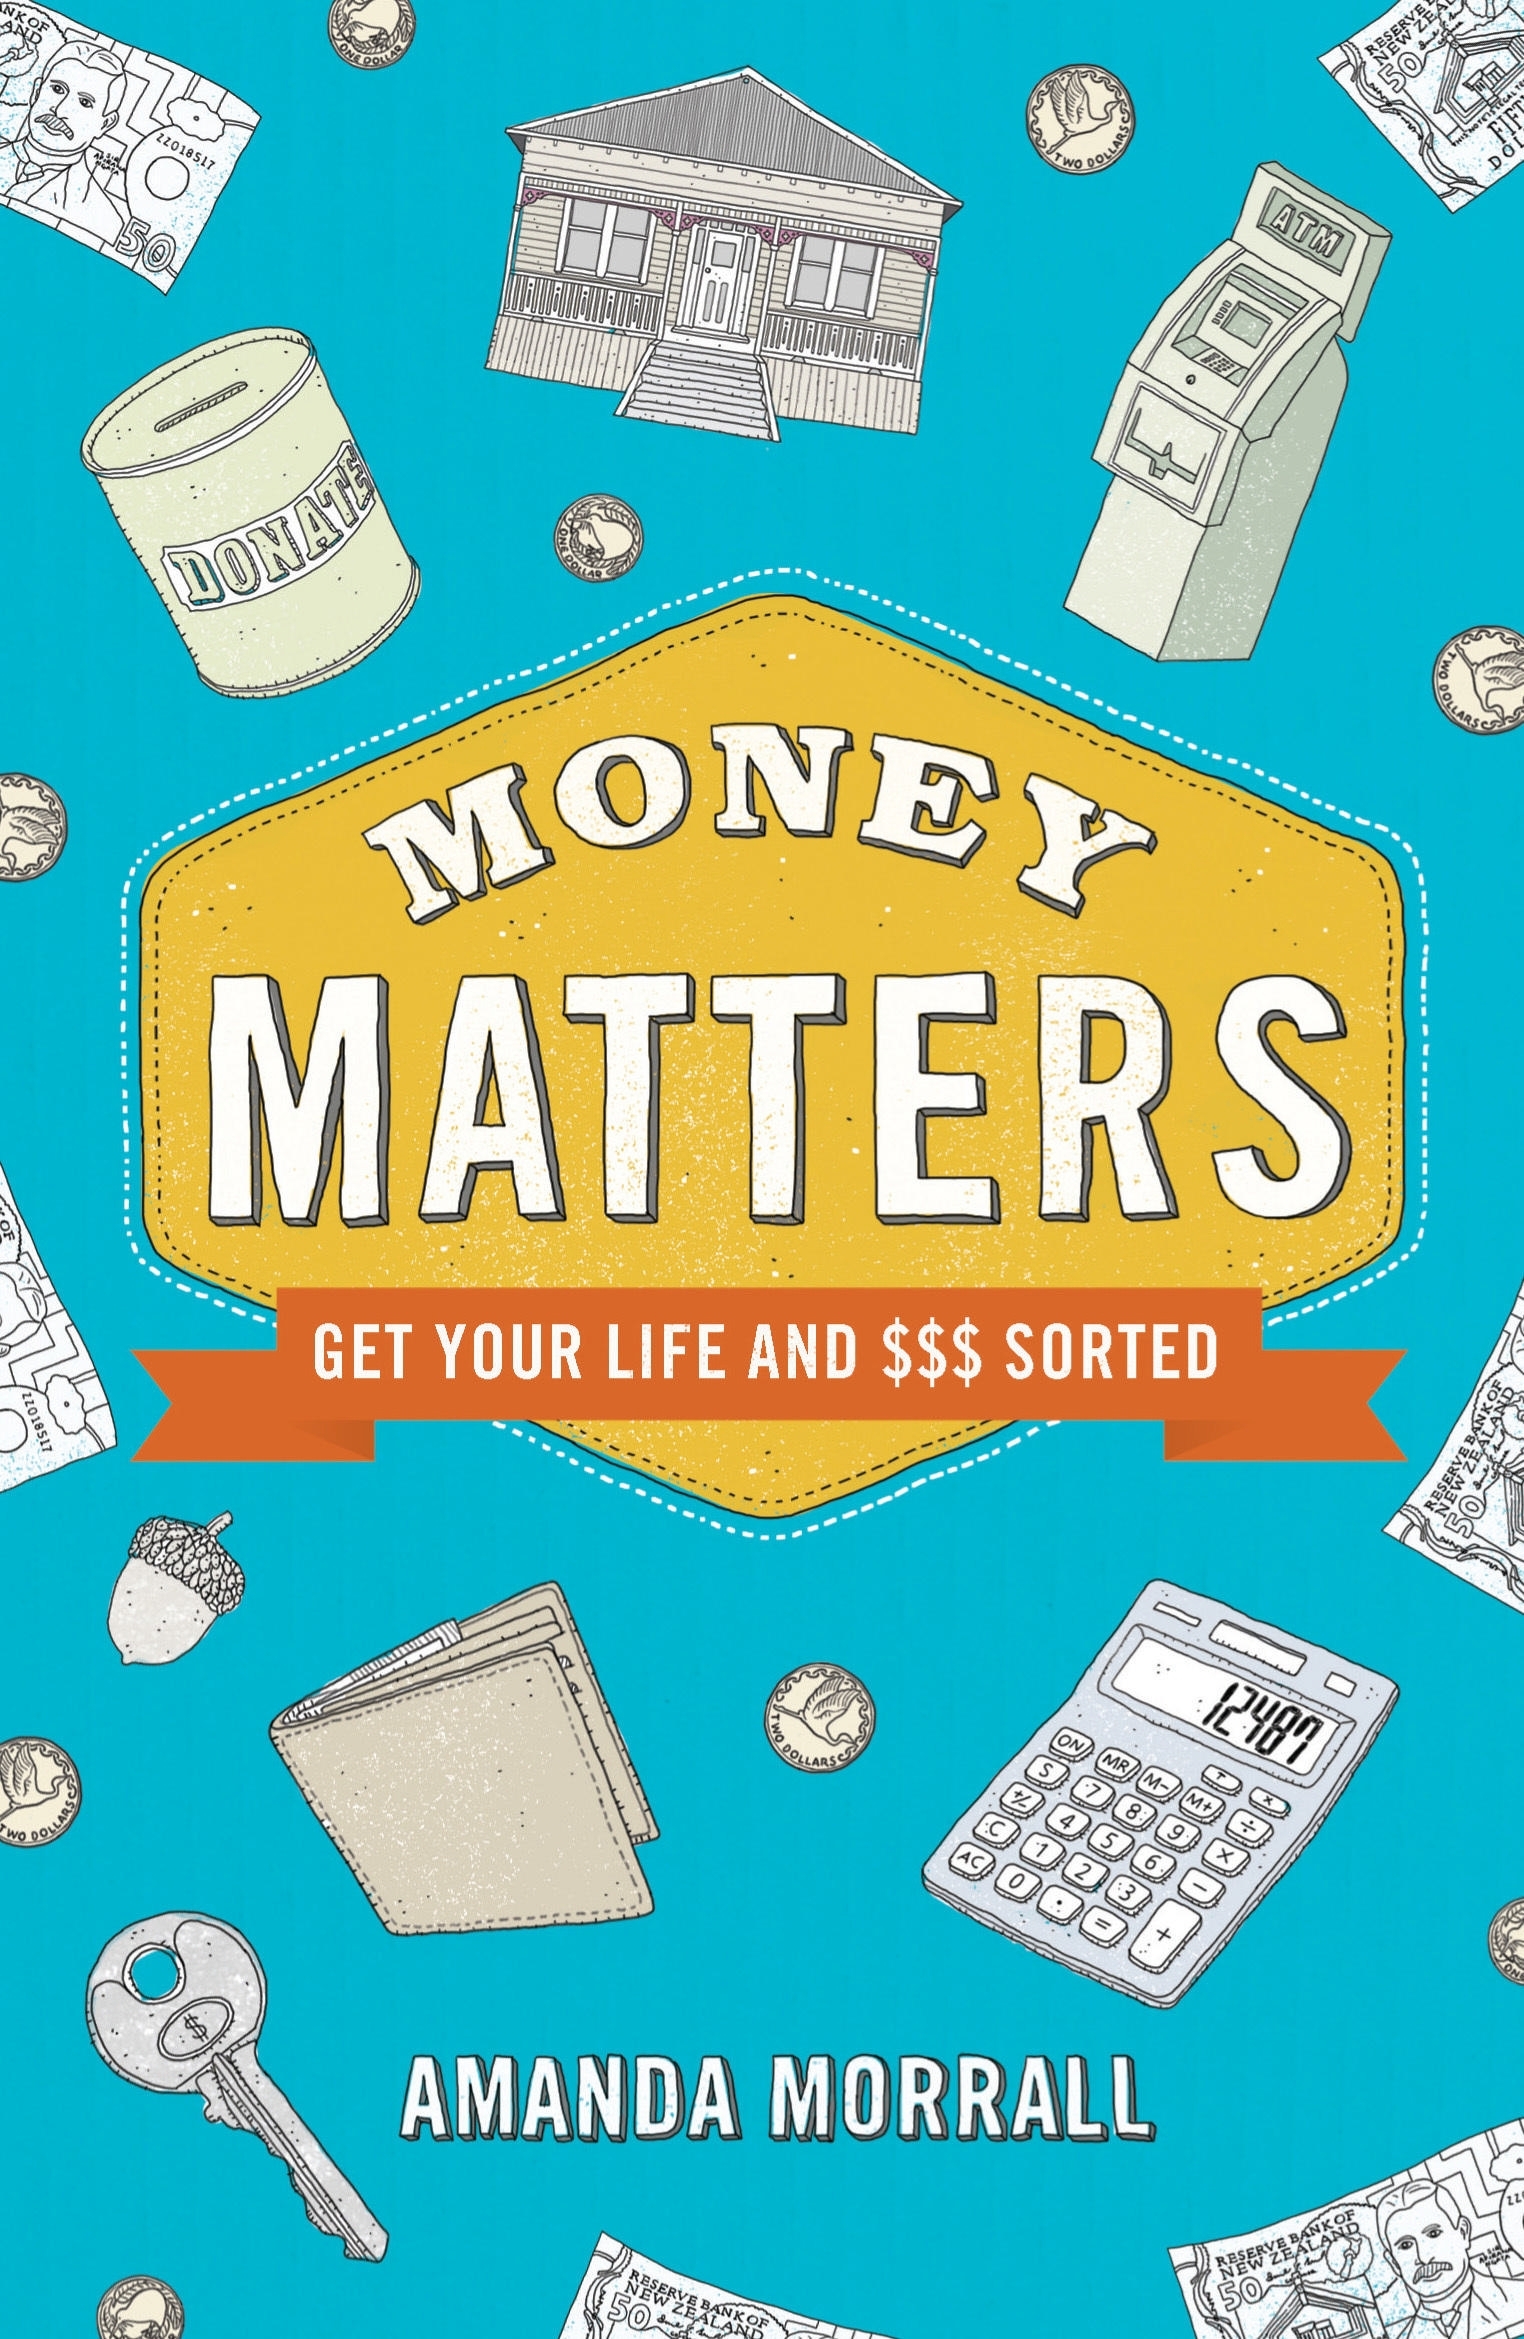 Money Matters Get Your Life And Sorted By Amanda Morrall Penguin